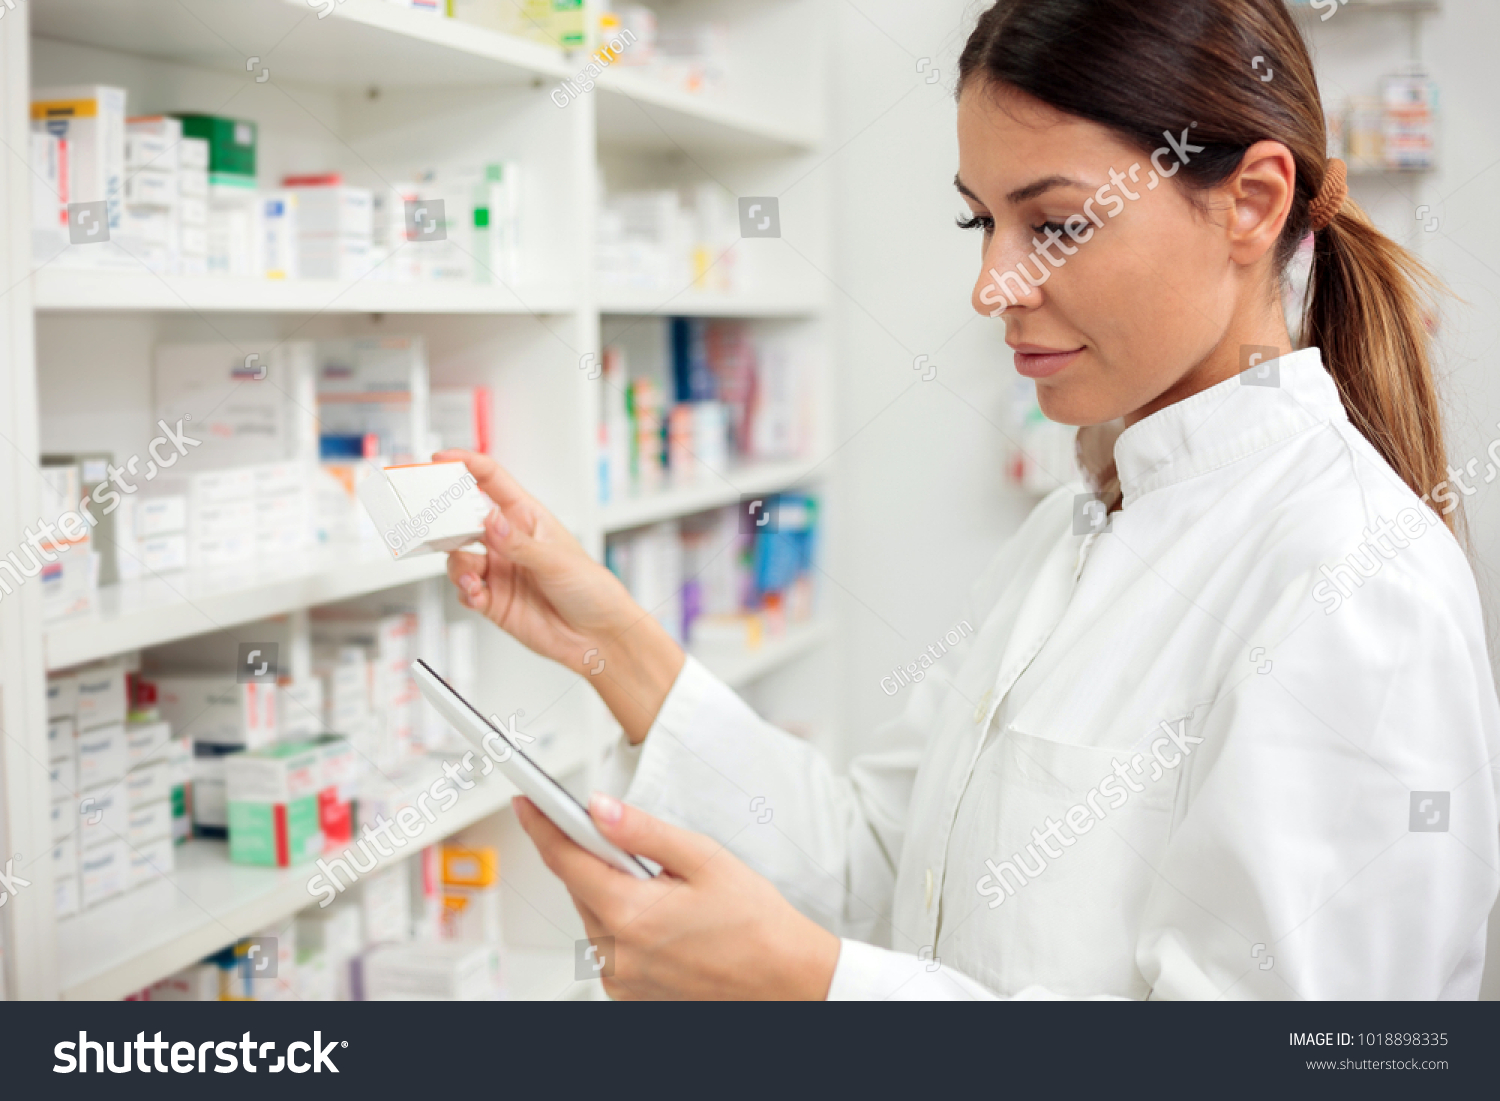 Medicine, pharmaceutics, health care and people concept - Serious young female pharmacist taking medications from the shelf. #1018898335